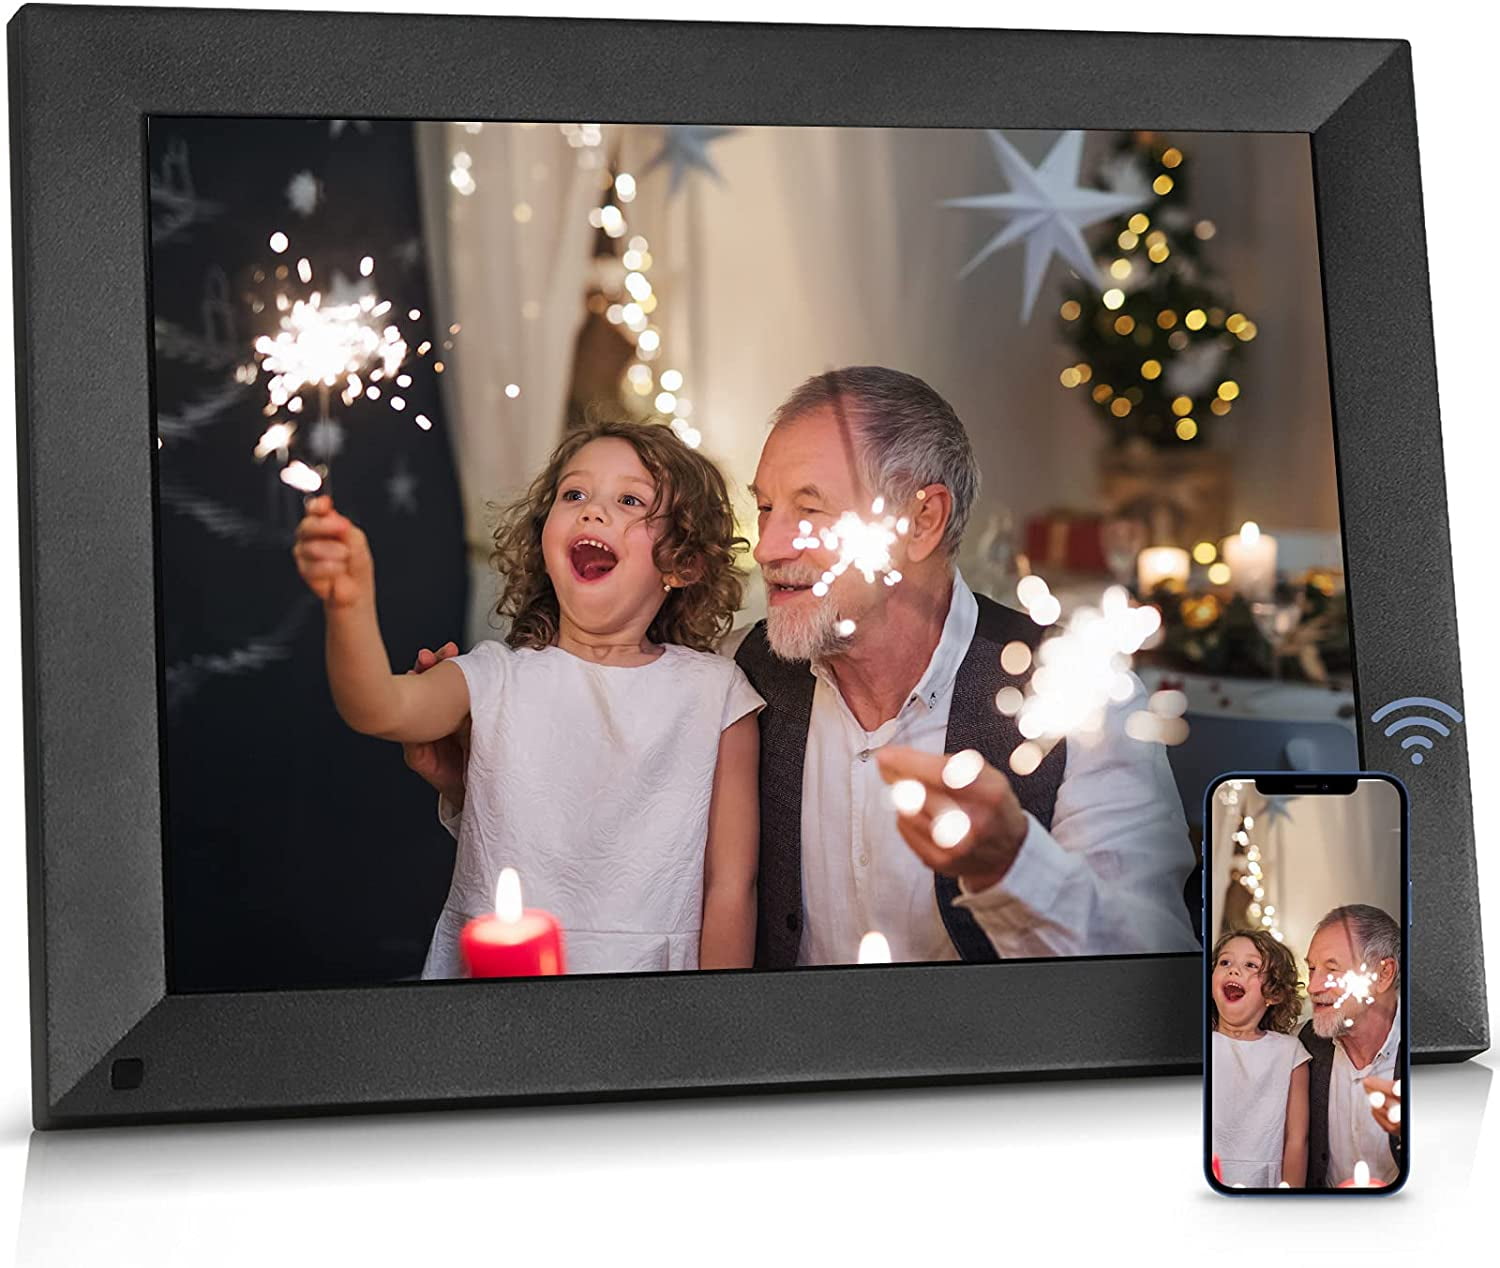 Wall Mountable Share Photos and Videos via App Email Auto-Rotate BSIMB 15 Inch Large Digital Picture Frame WiFi Photo Frame Touch Screen with 16GB Storage 